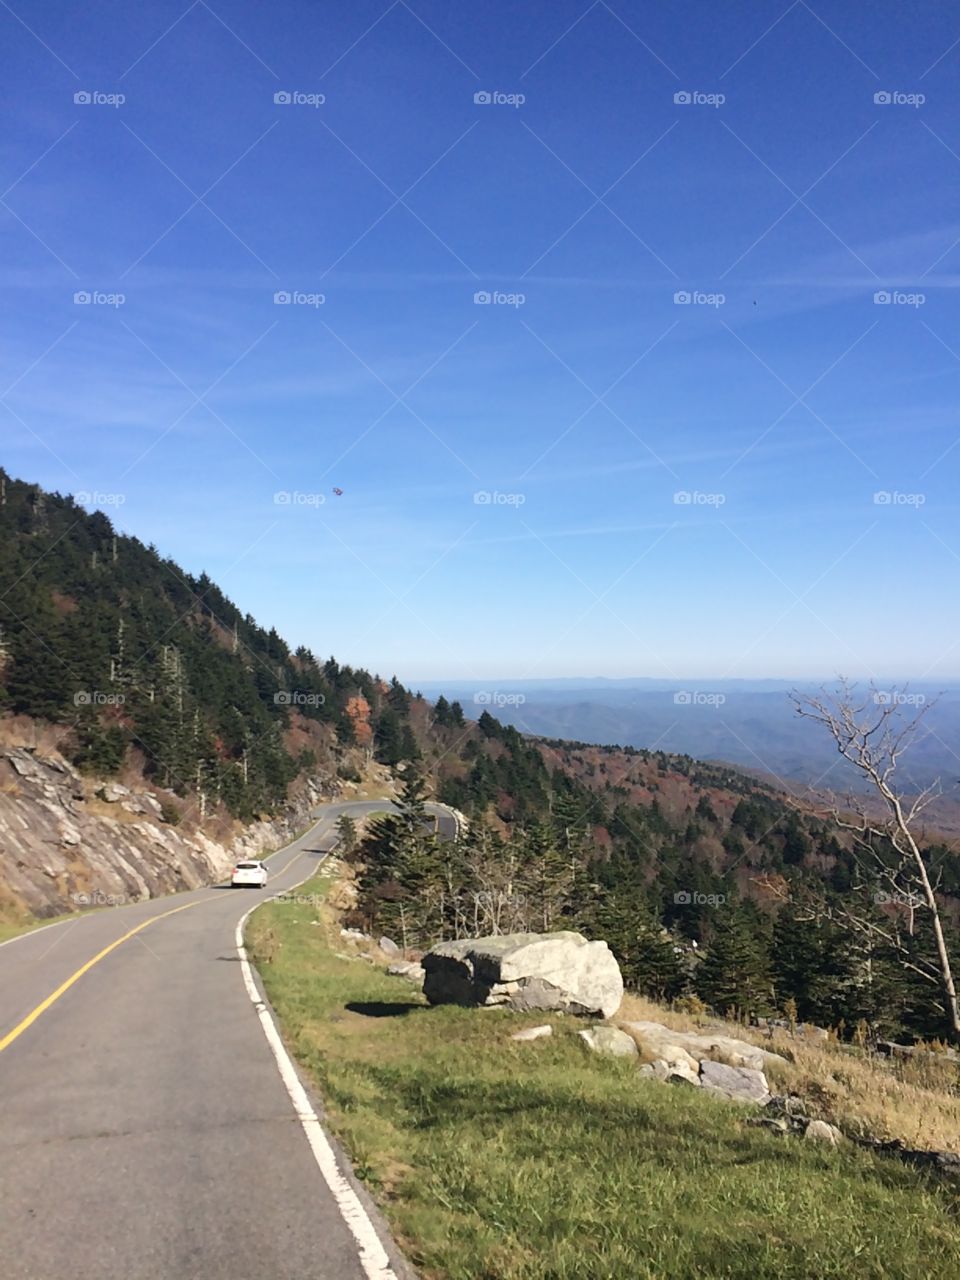 As we drove down grandfather mountain we rounded a bend in the road and all of sudden this view showed up and I grabbed my phone because how can you not get a photo of this? With Carolina blue to light blue ombré sky and the winding road it was perf.